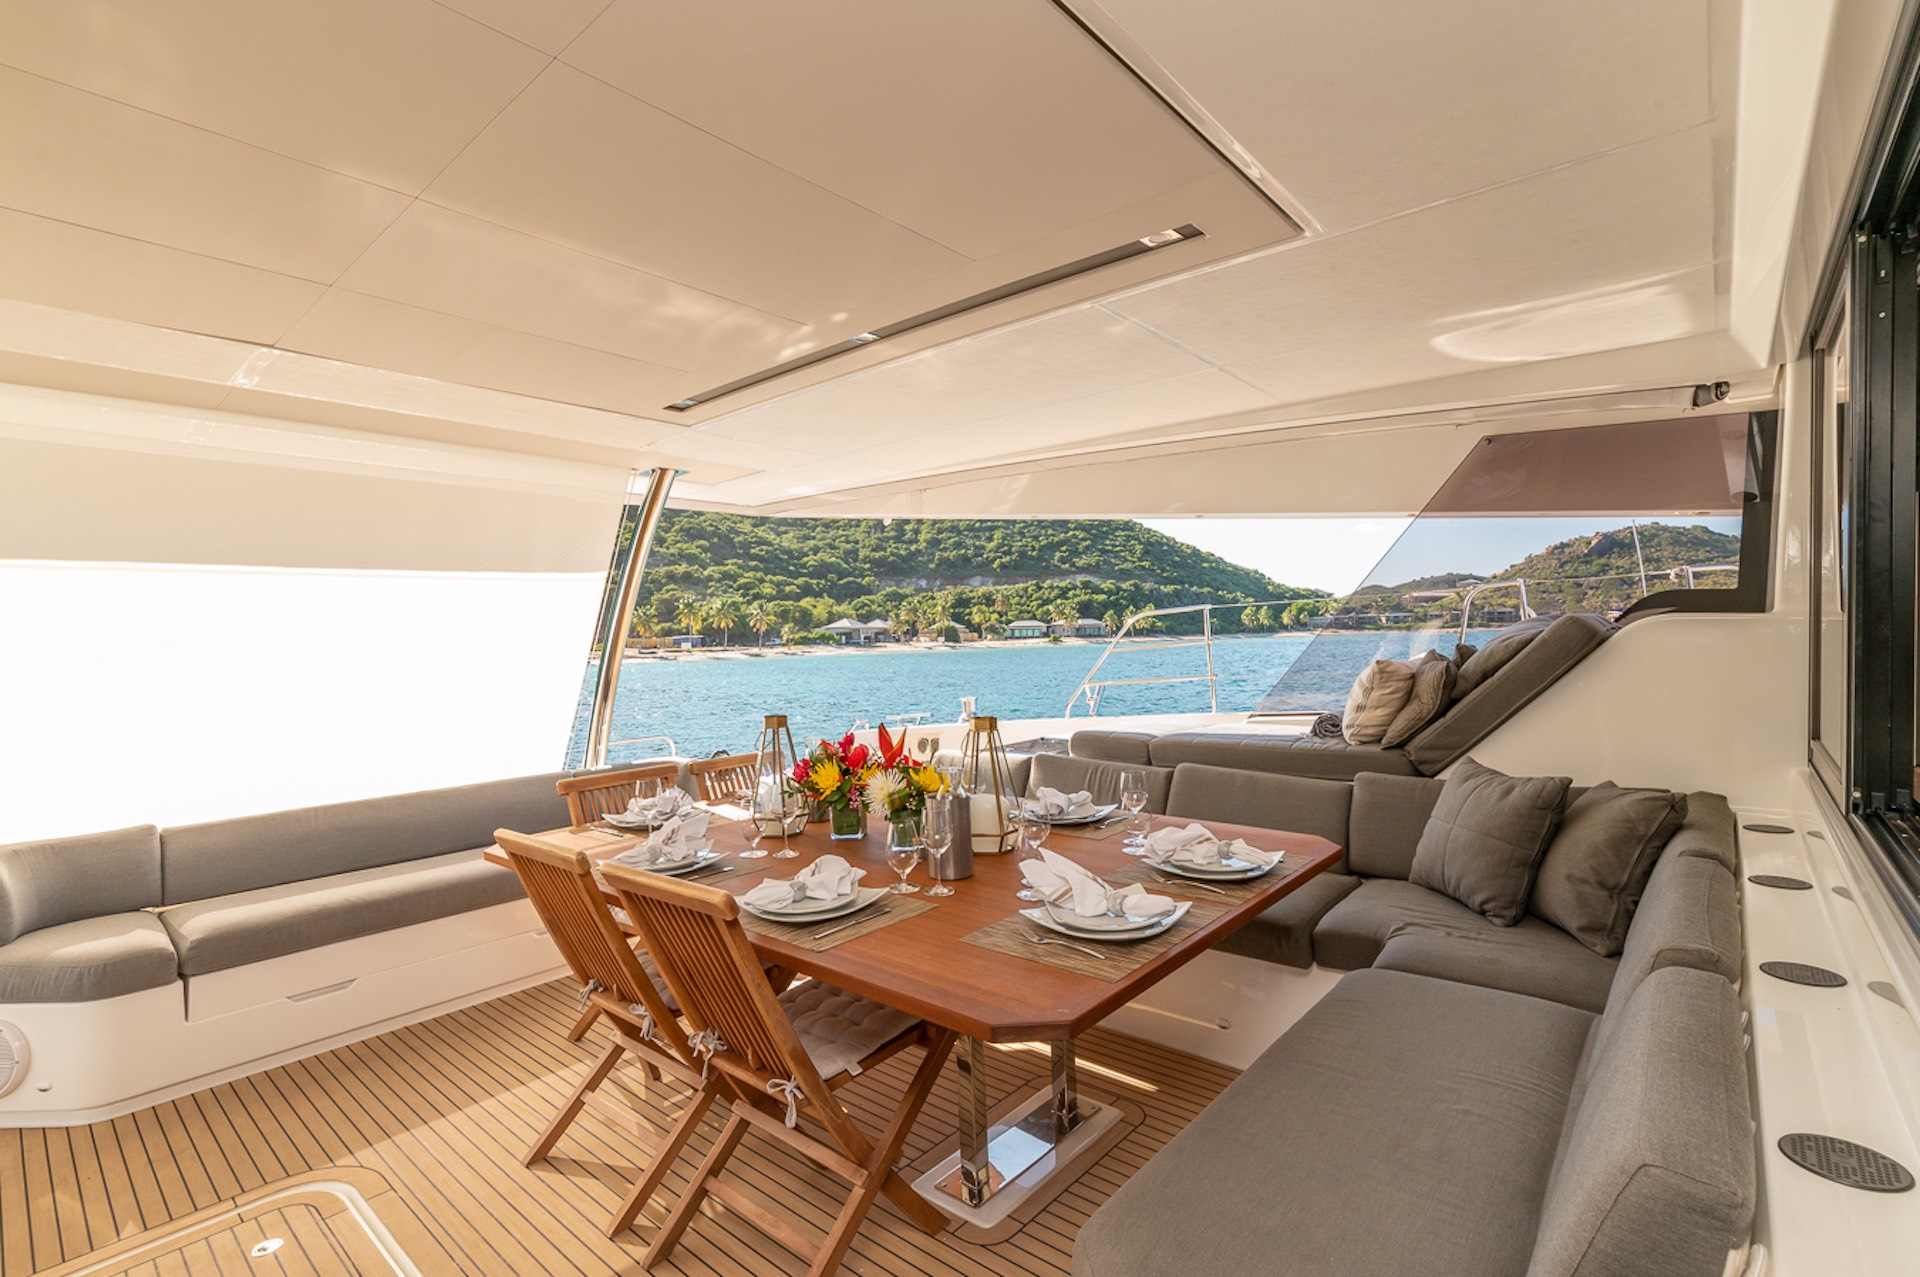 yacht charter Colibri aft deck dining